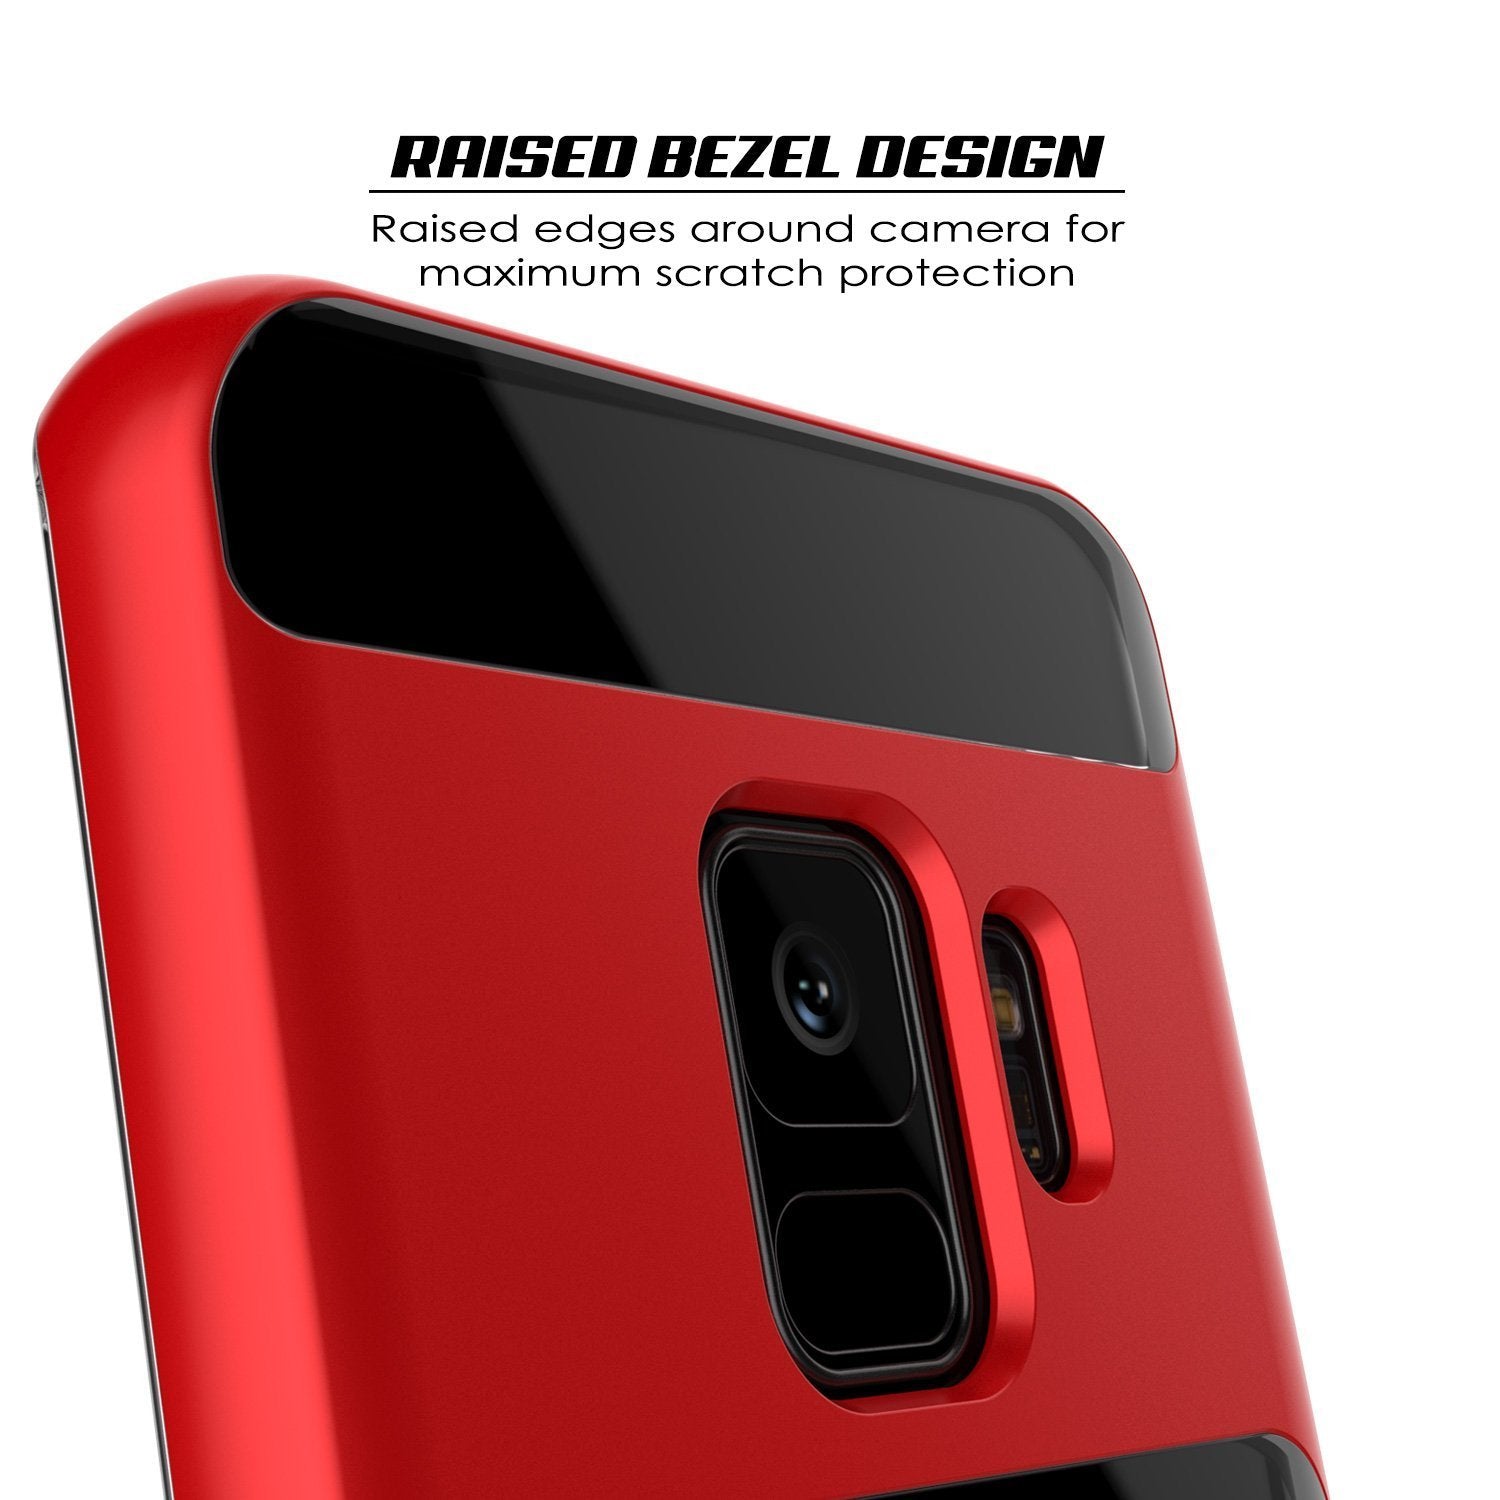 Galaxy S9 Case, PUNKcase [LUCID 3.0 Series] [Slim Fit] [Clear Back] Armor Cover w/ Integrated Kickstand, Anti-Shock System & PUNKSHIELD Screen Protector for Samsung Galaxy S9 [Red]